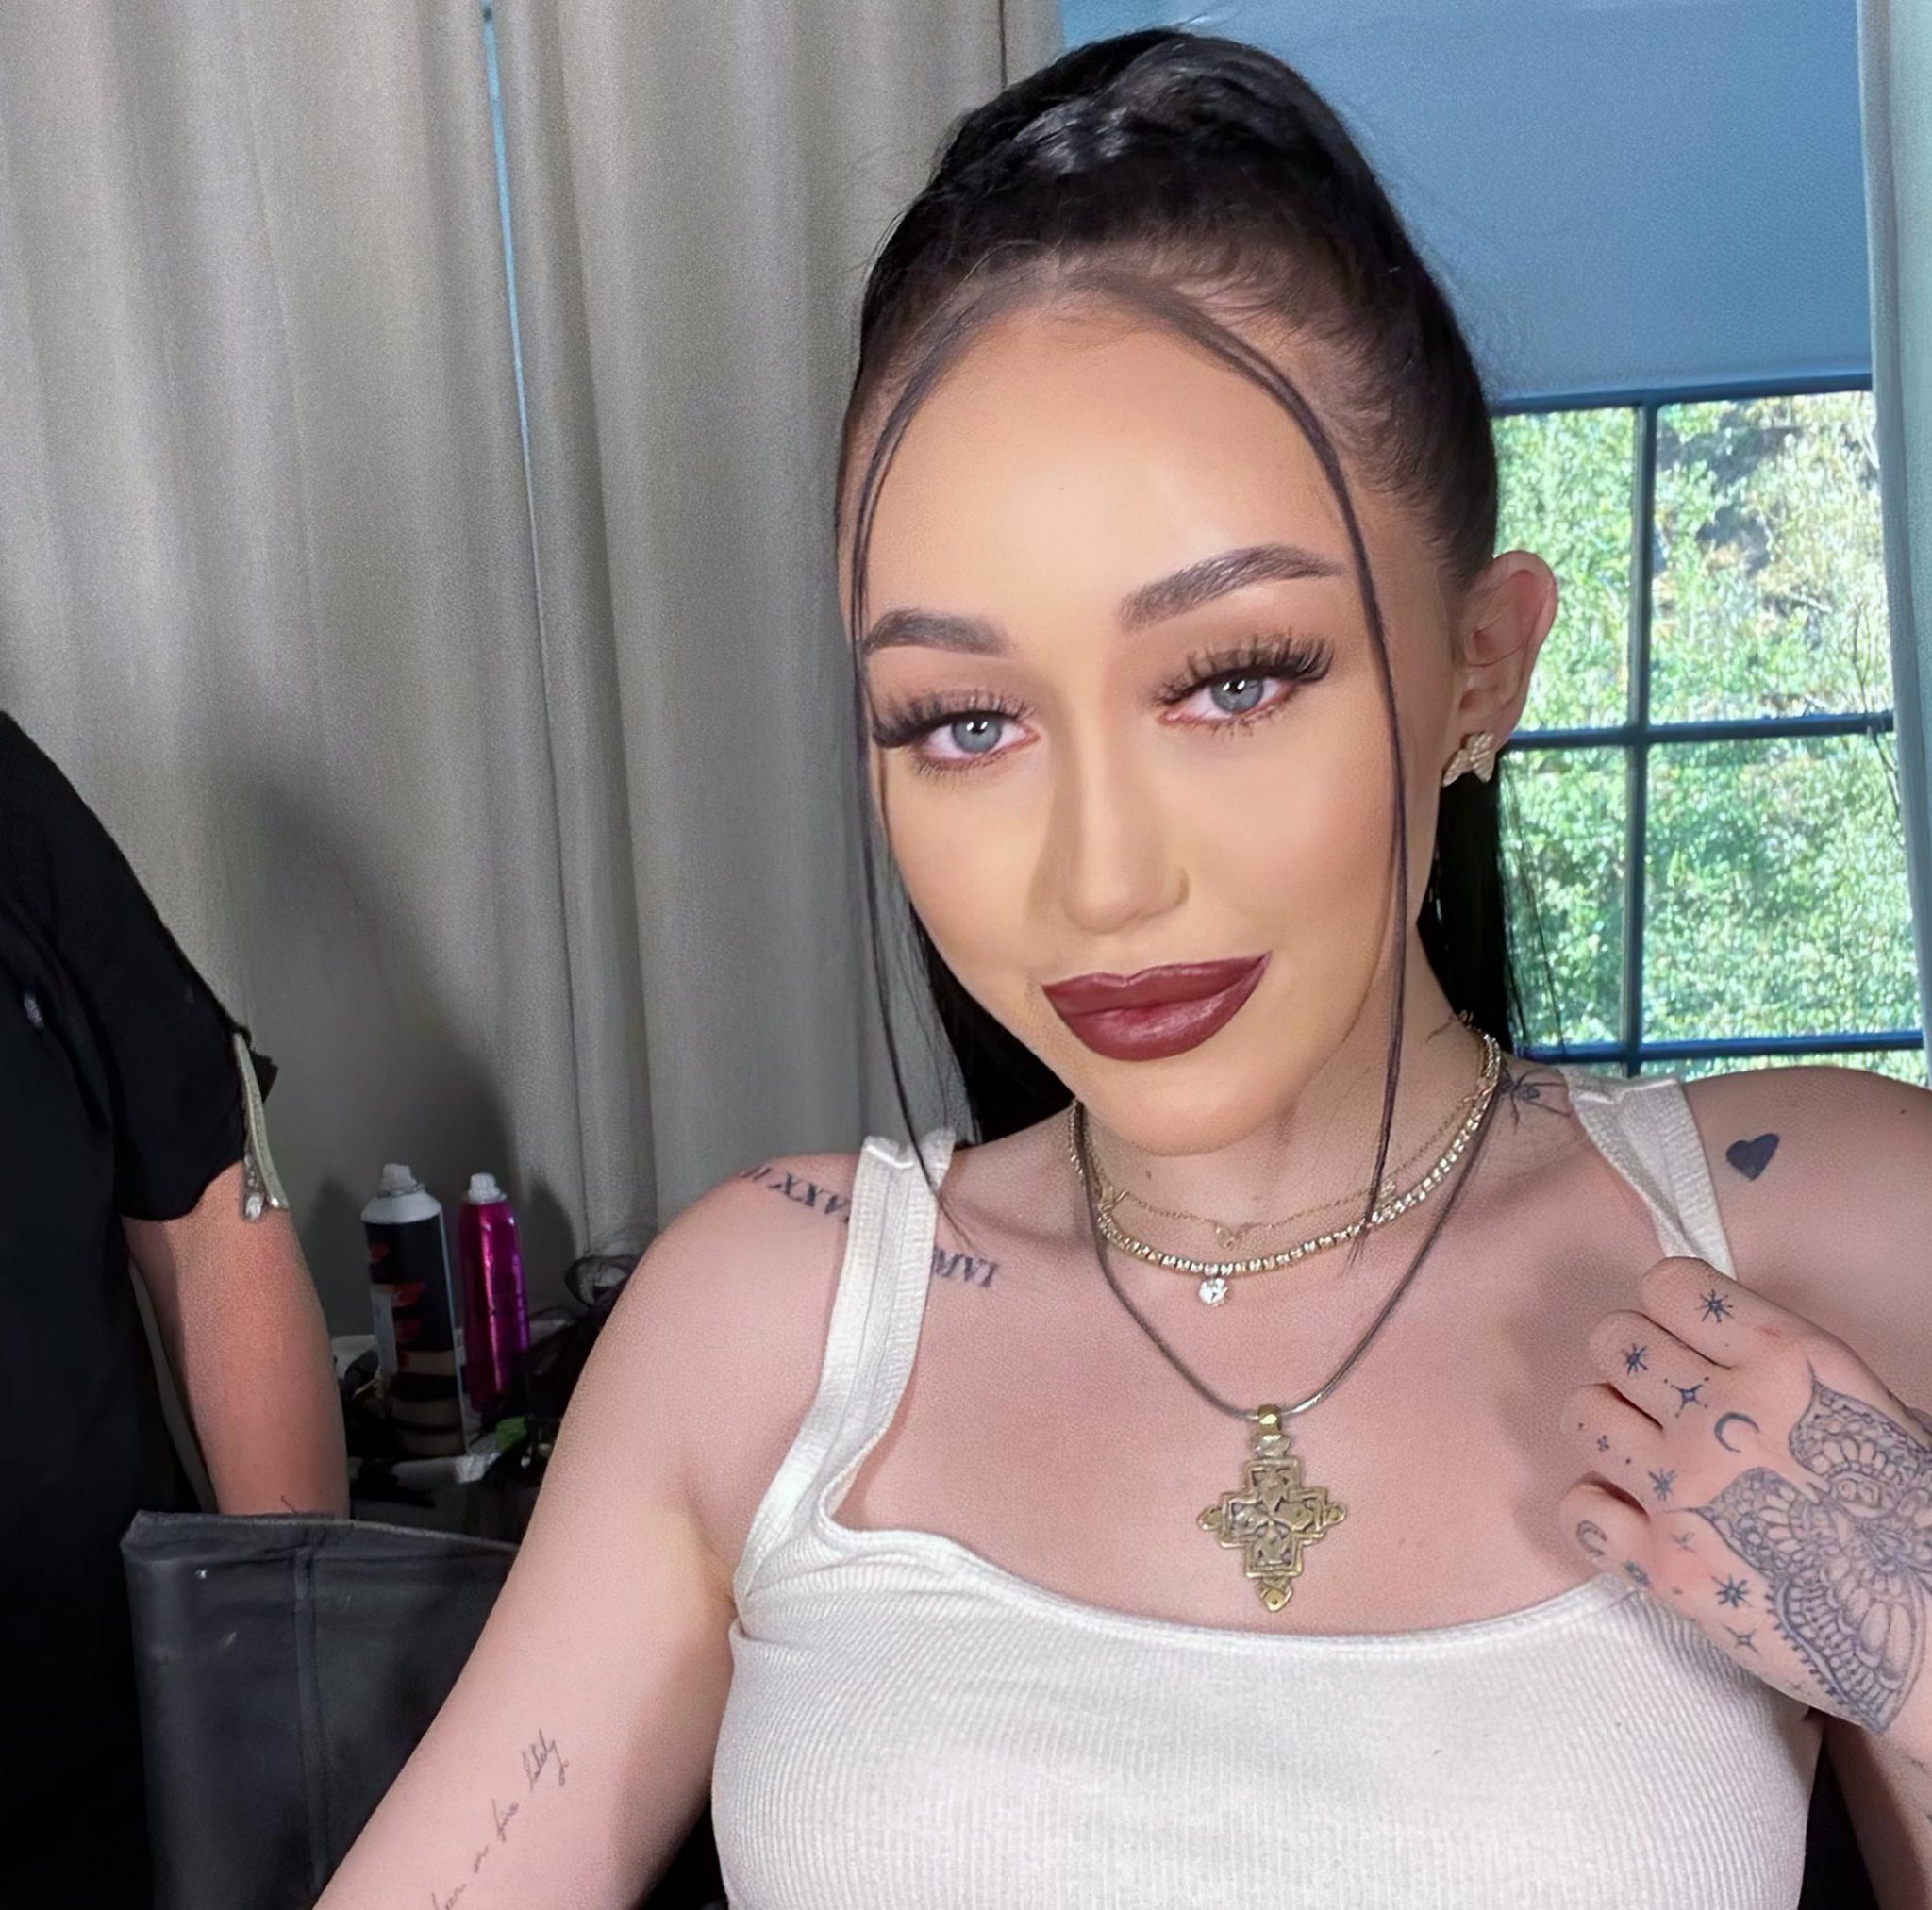 Noah Cyrus Nude Leaked Pics And Hot Porn Video [2021] Scandal Planet